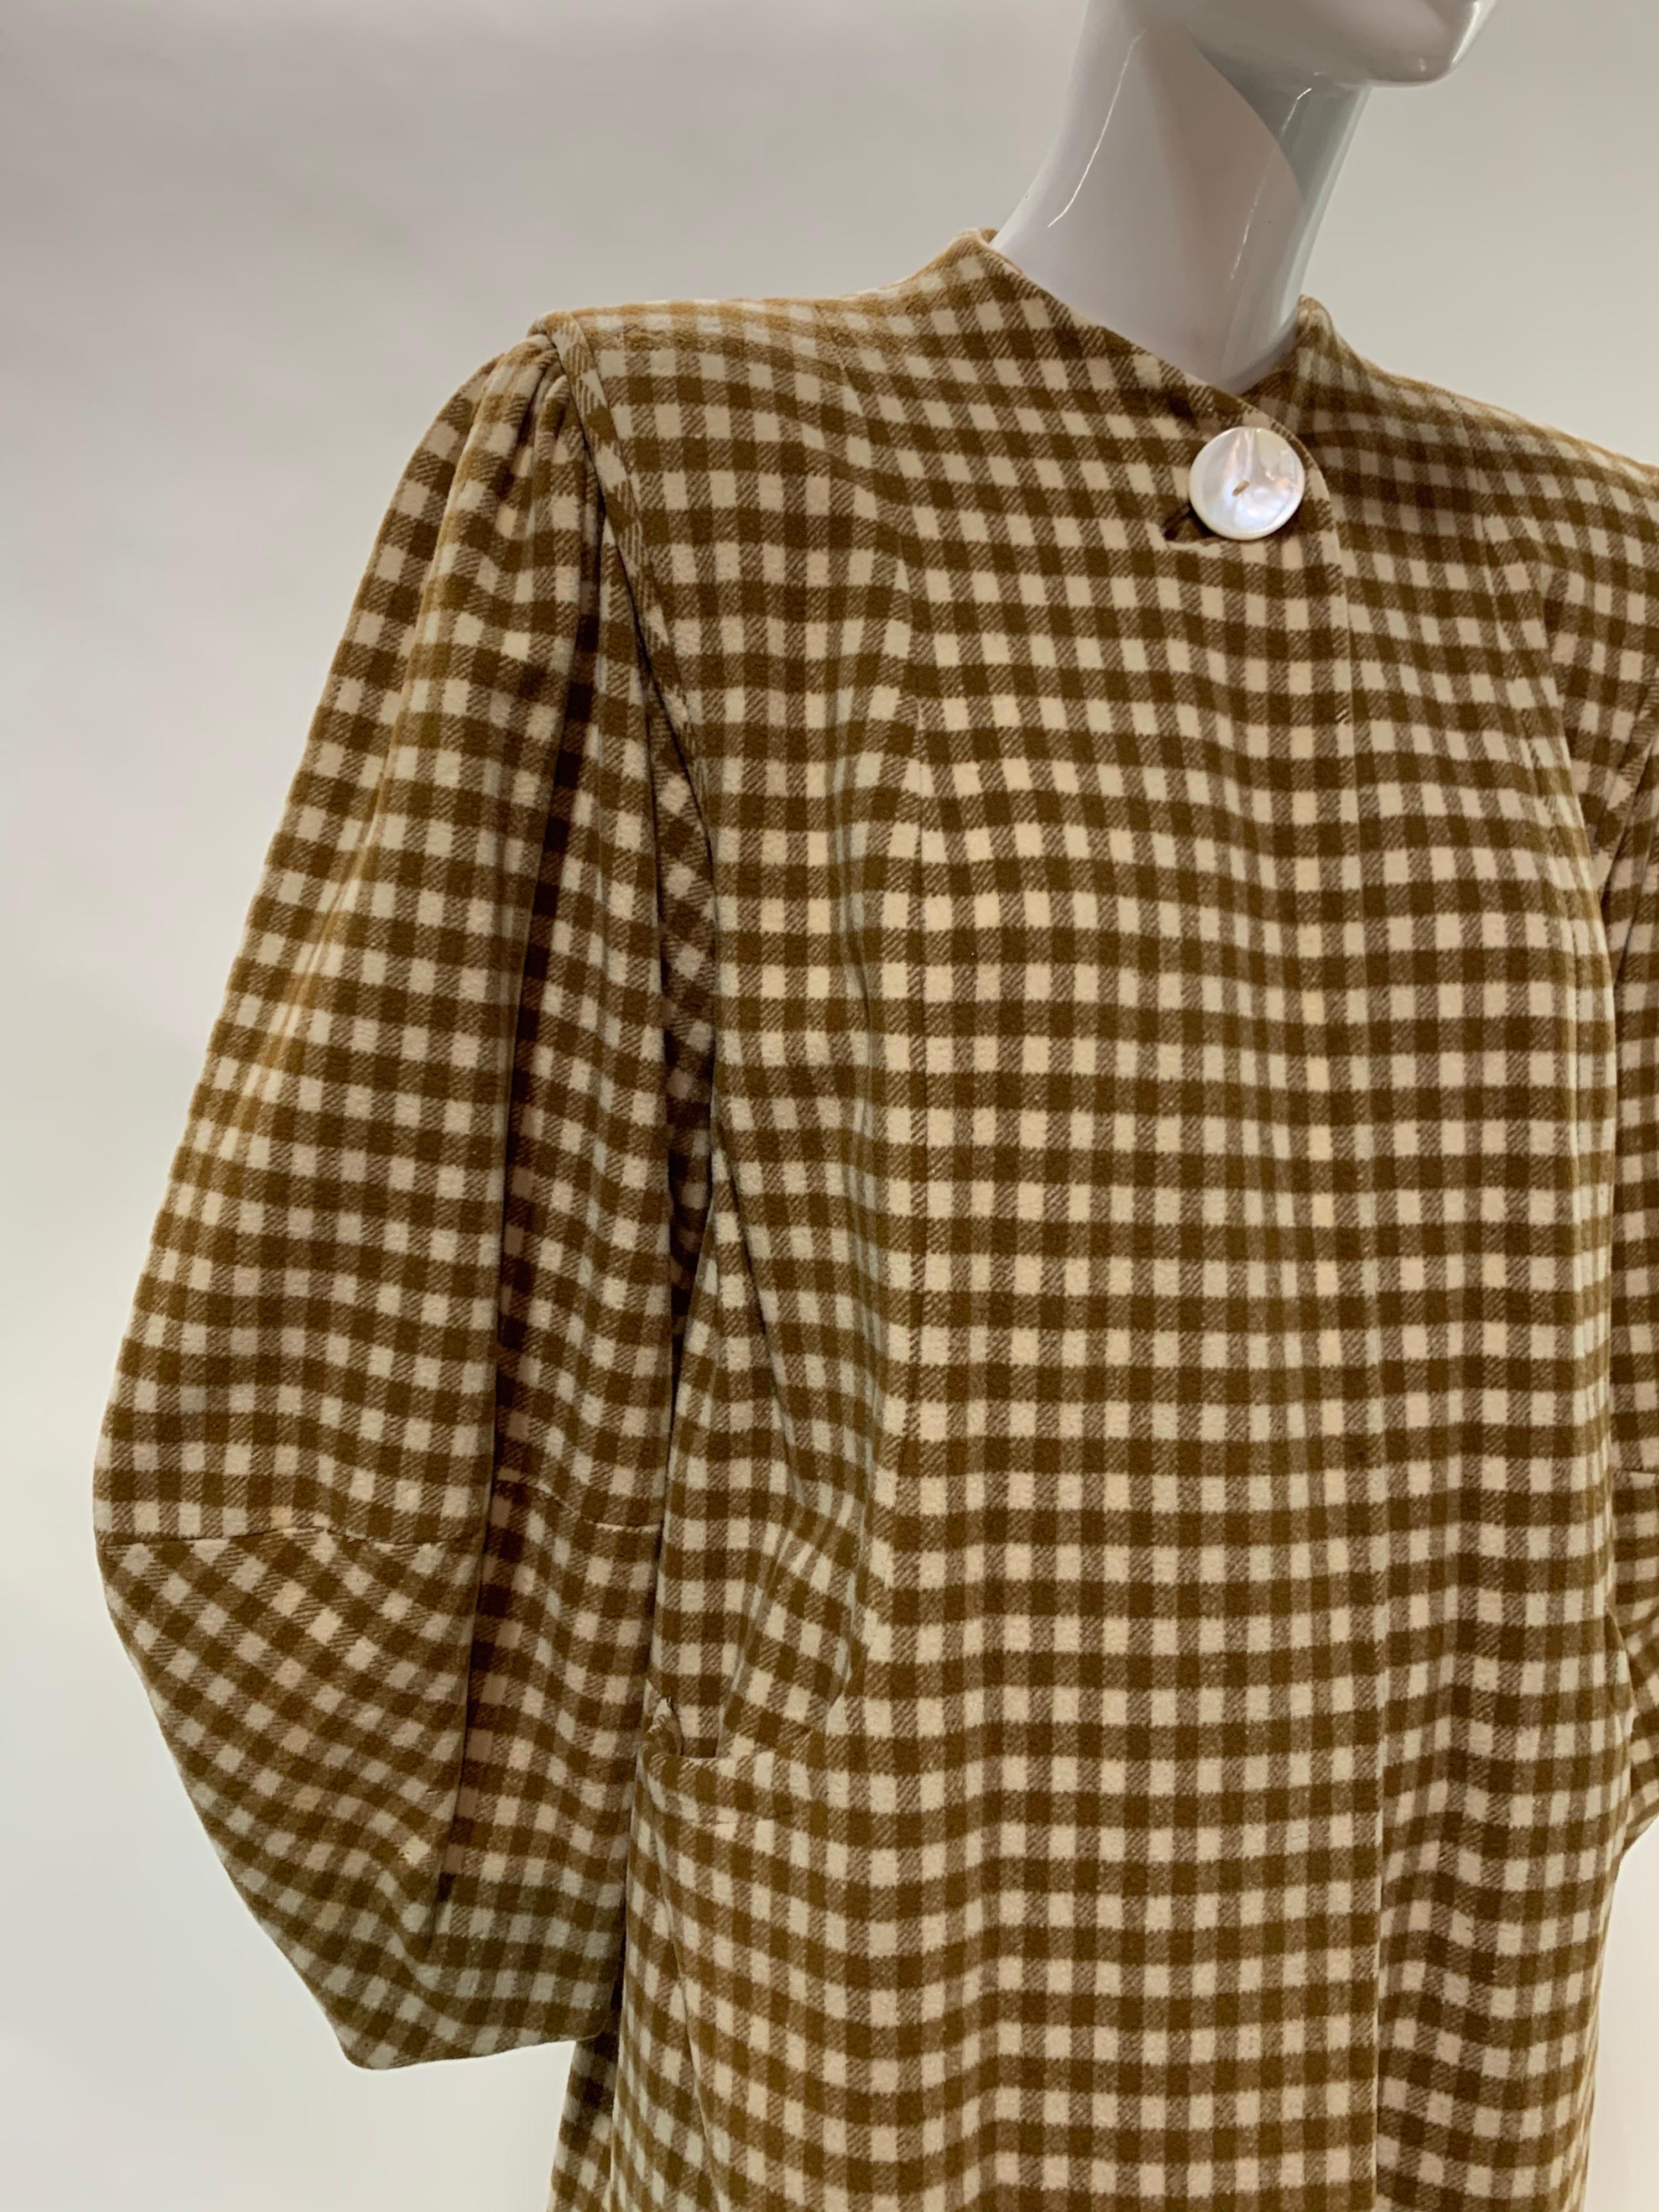 A stunning 1940s caramel and cream checked wool swing coat with a strong, structured iconic shoulder silhouette, lantern shaped sleeves and a single button closure at neck. No collar. Fully lined. Size 8.